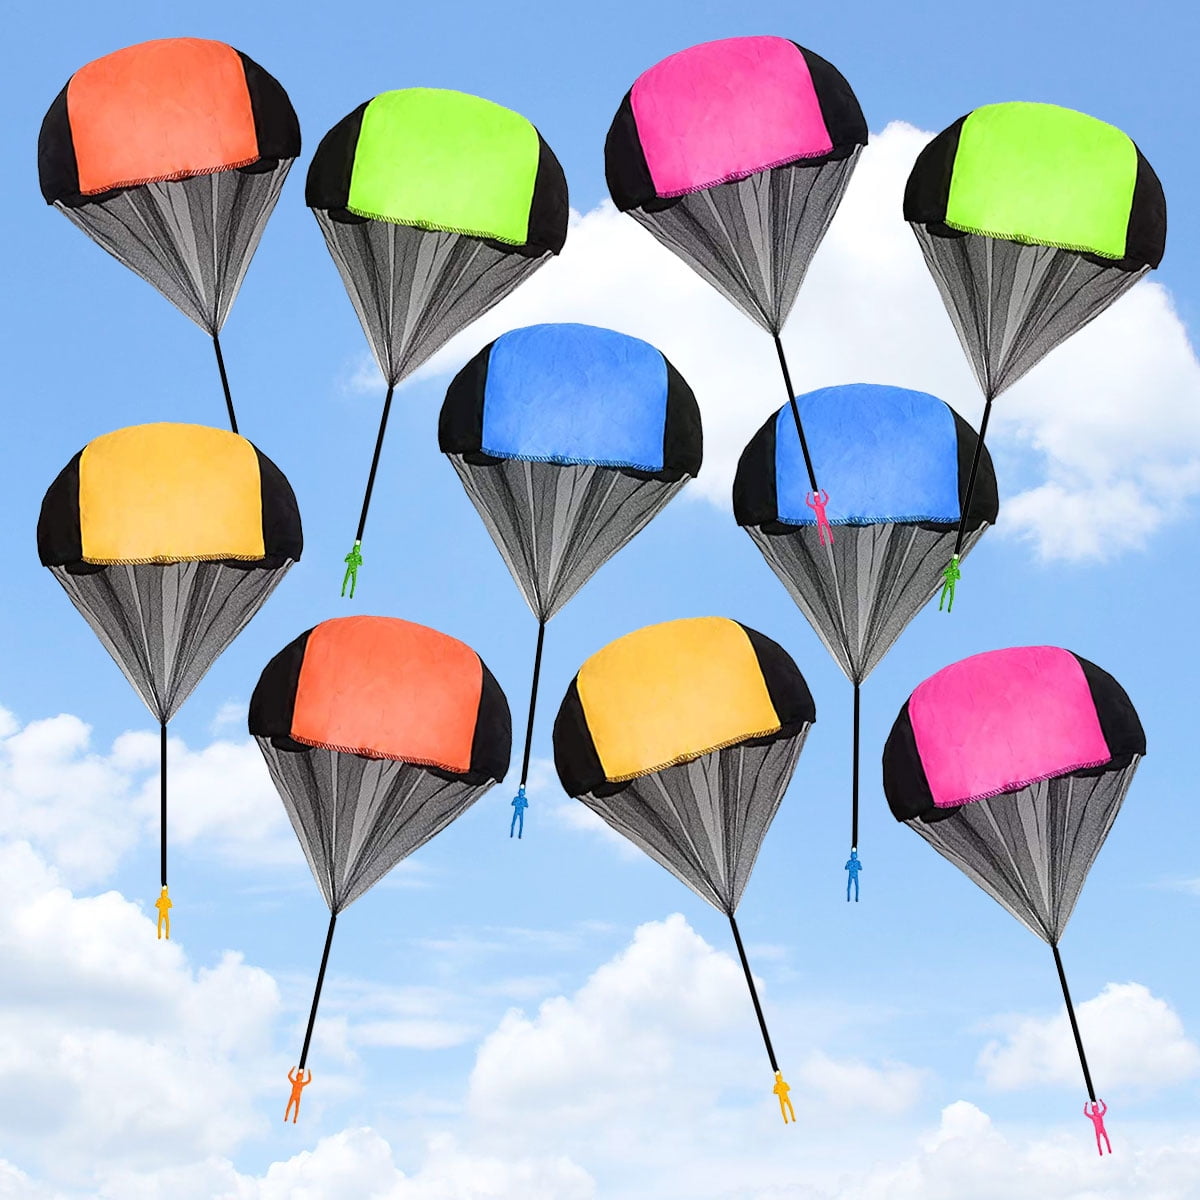 Children's Hand Throw Parachute Flying Toys 10 Pcs Parachute Outdoor Toys for Kids Tangle Free Toss It Up Then Landing Parachute Toys for Kids Gifts. 